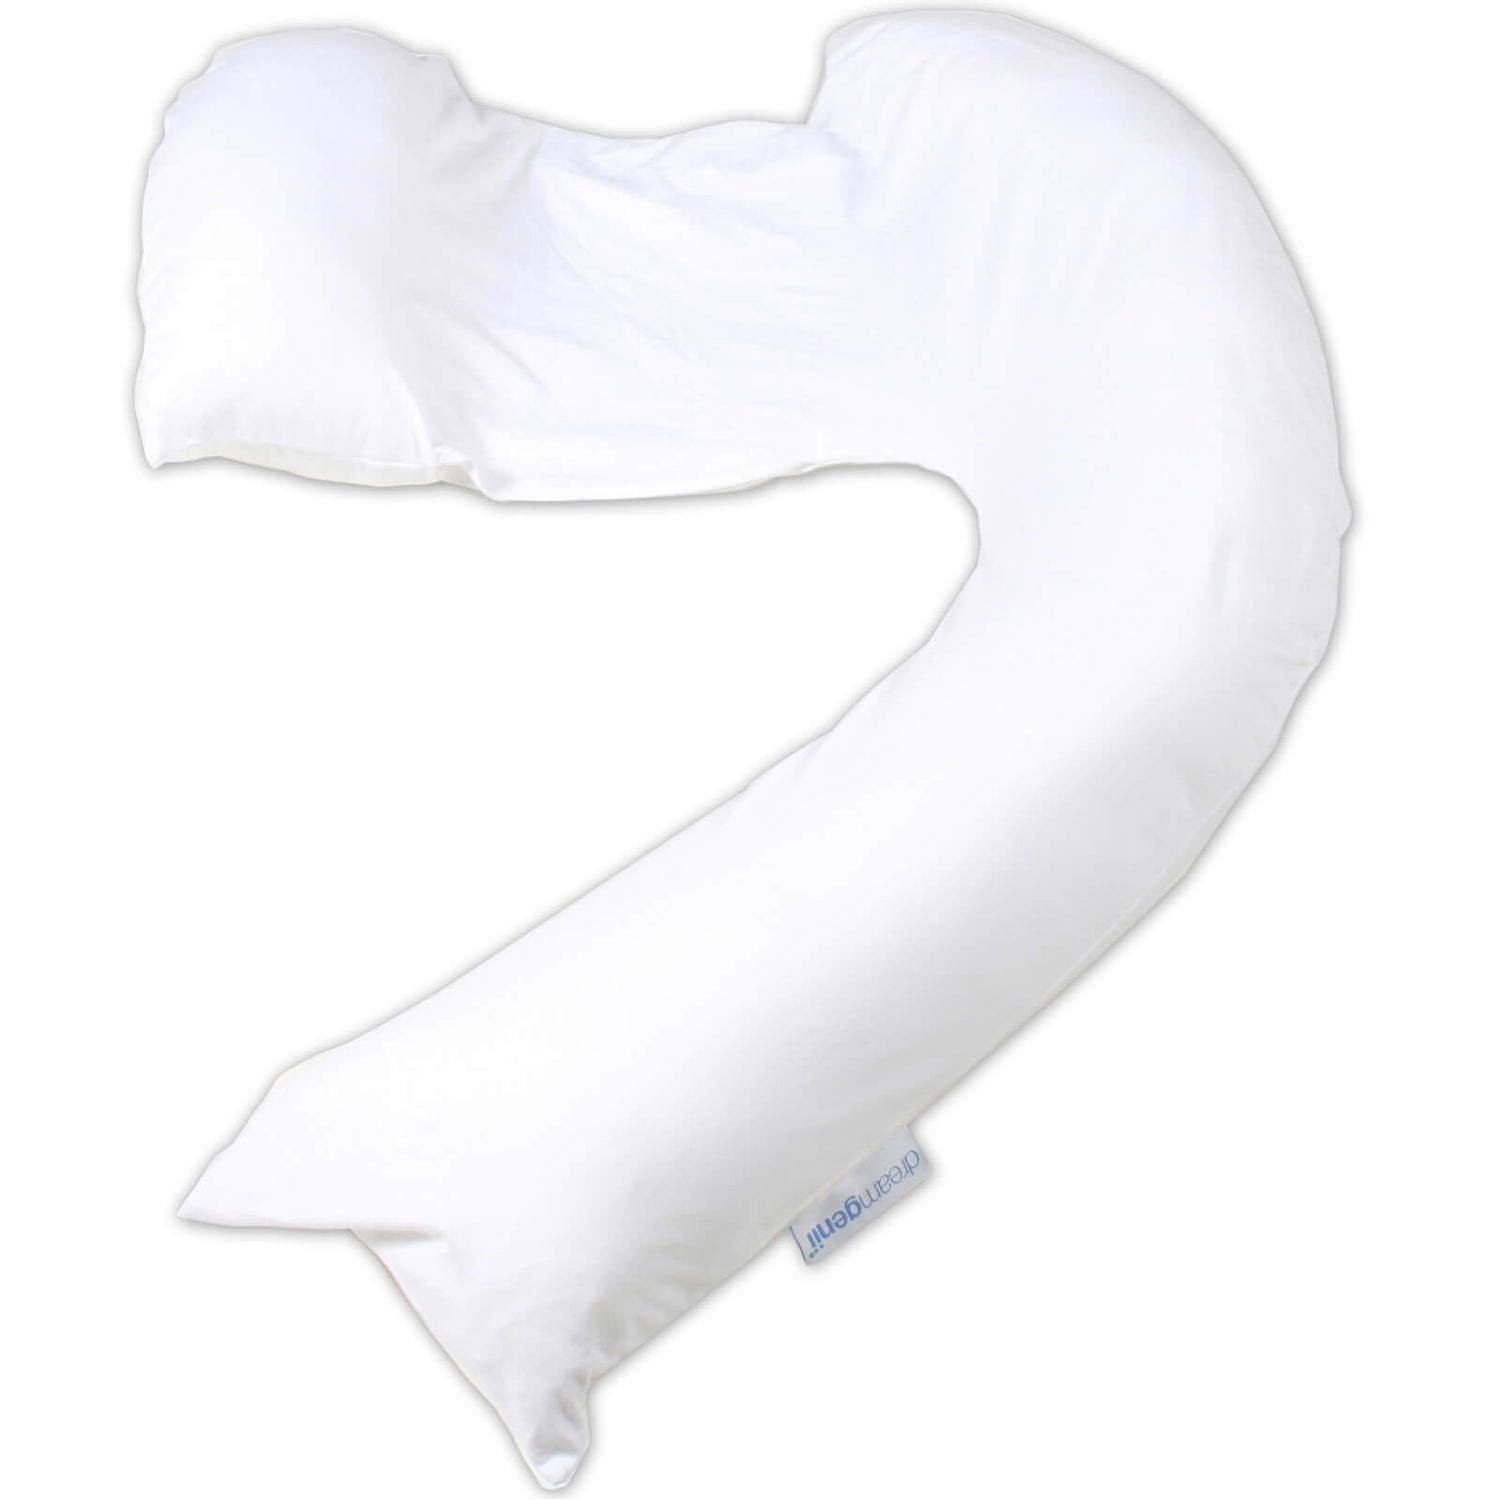 Dreamgenii Pregnancy Support and Feeding Pillow - White